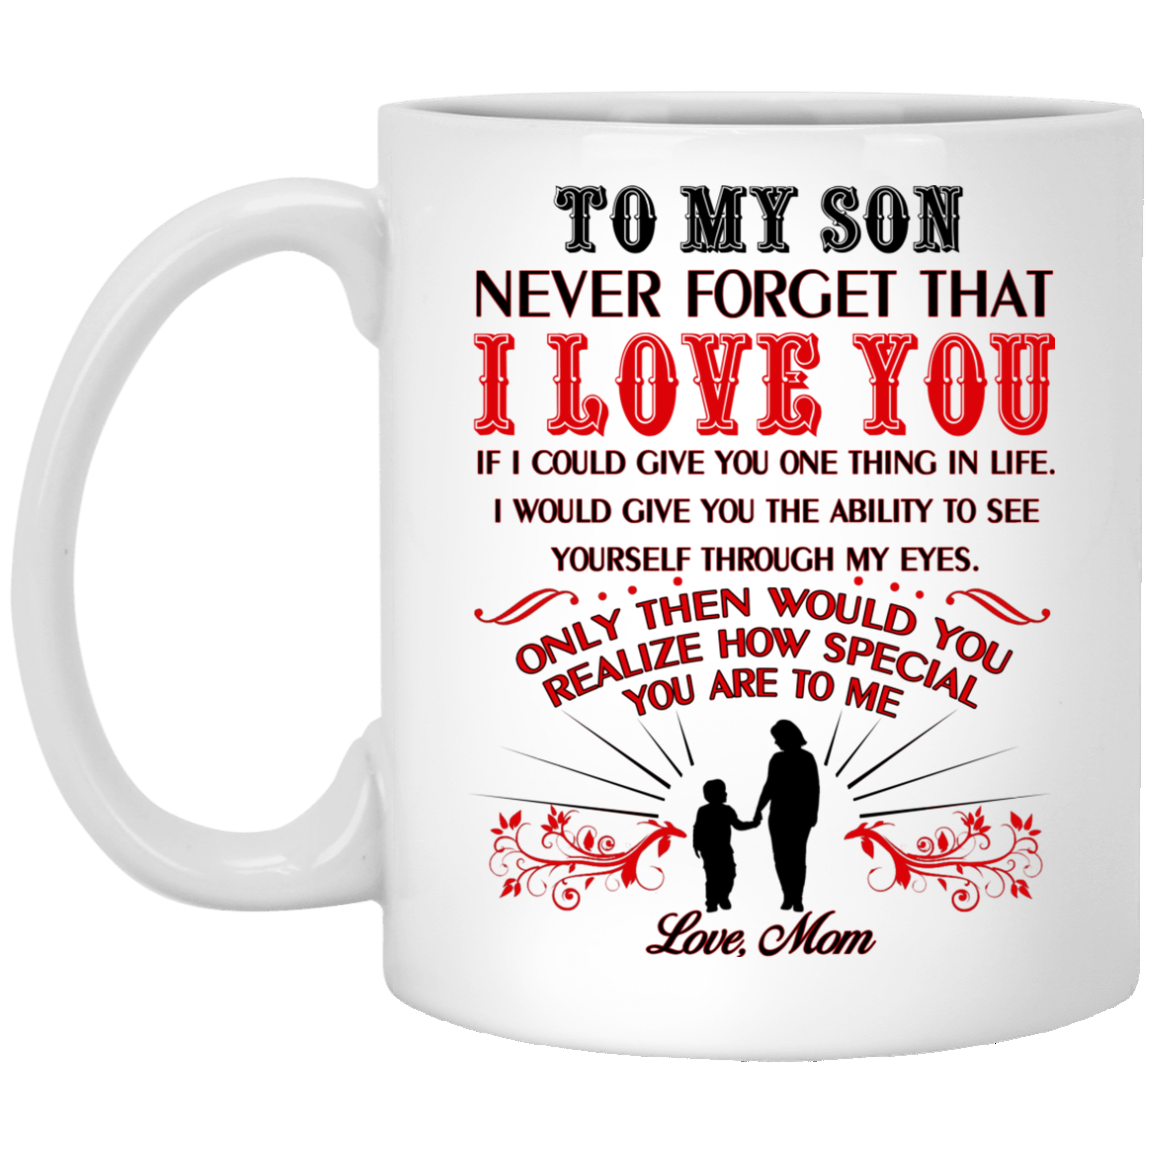 To My Son Love Mom Mug - Never forget that I love you